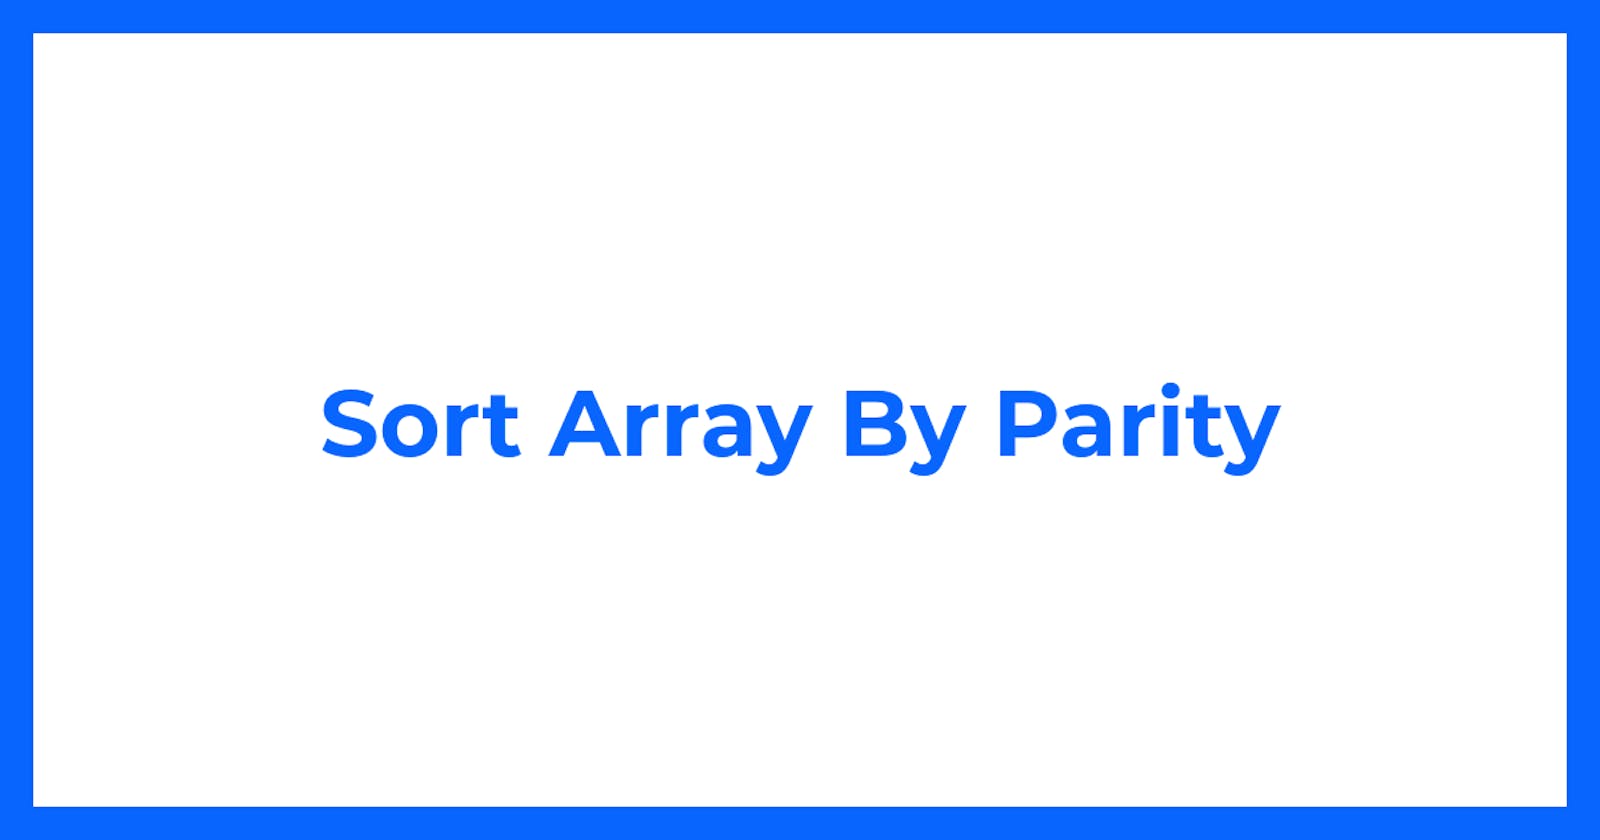 Sort Array By Parity